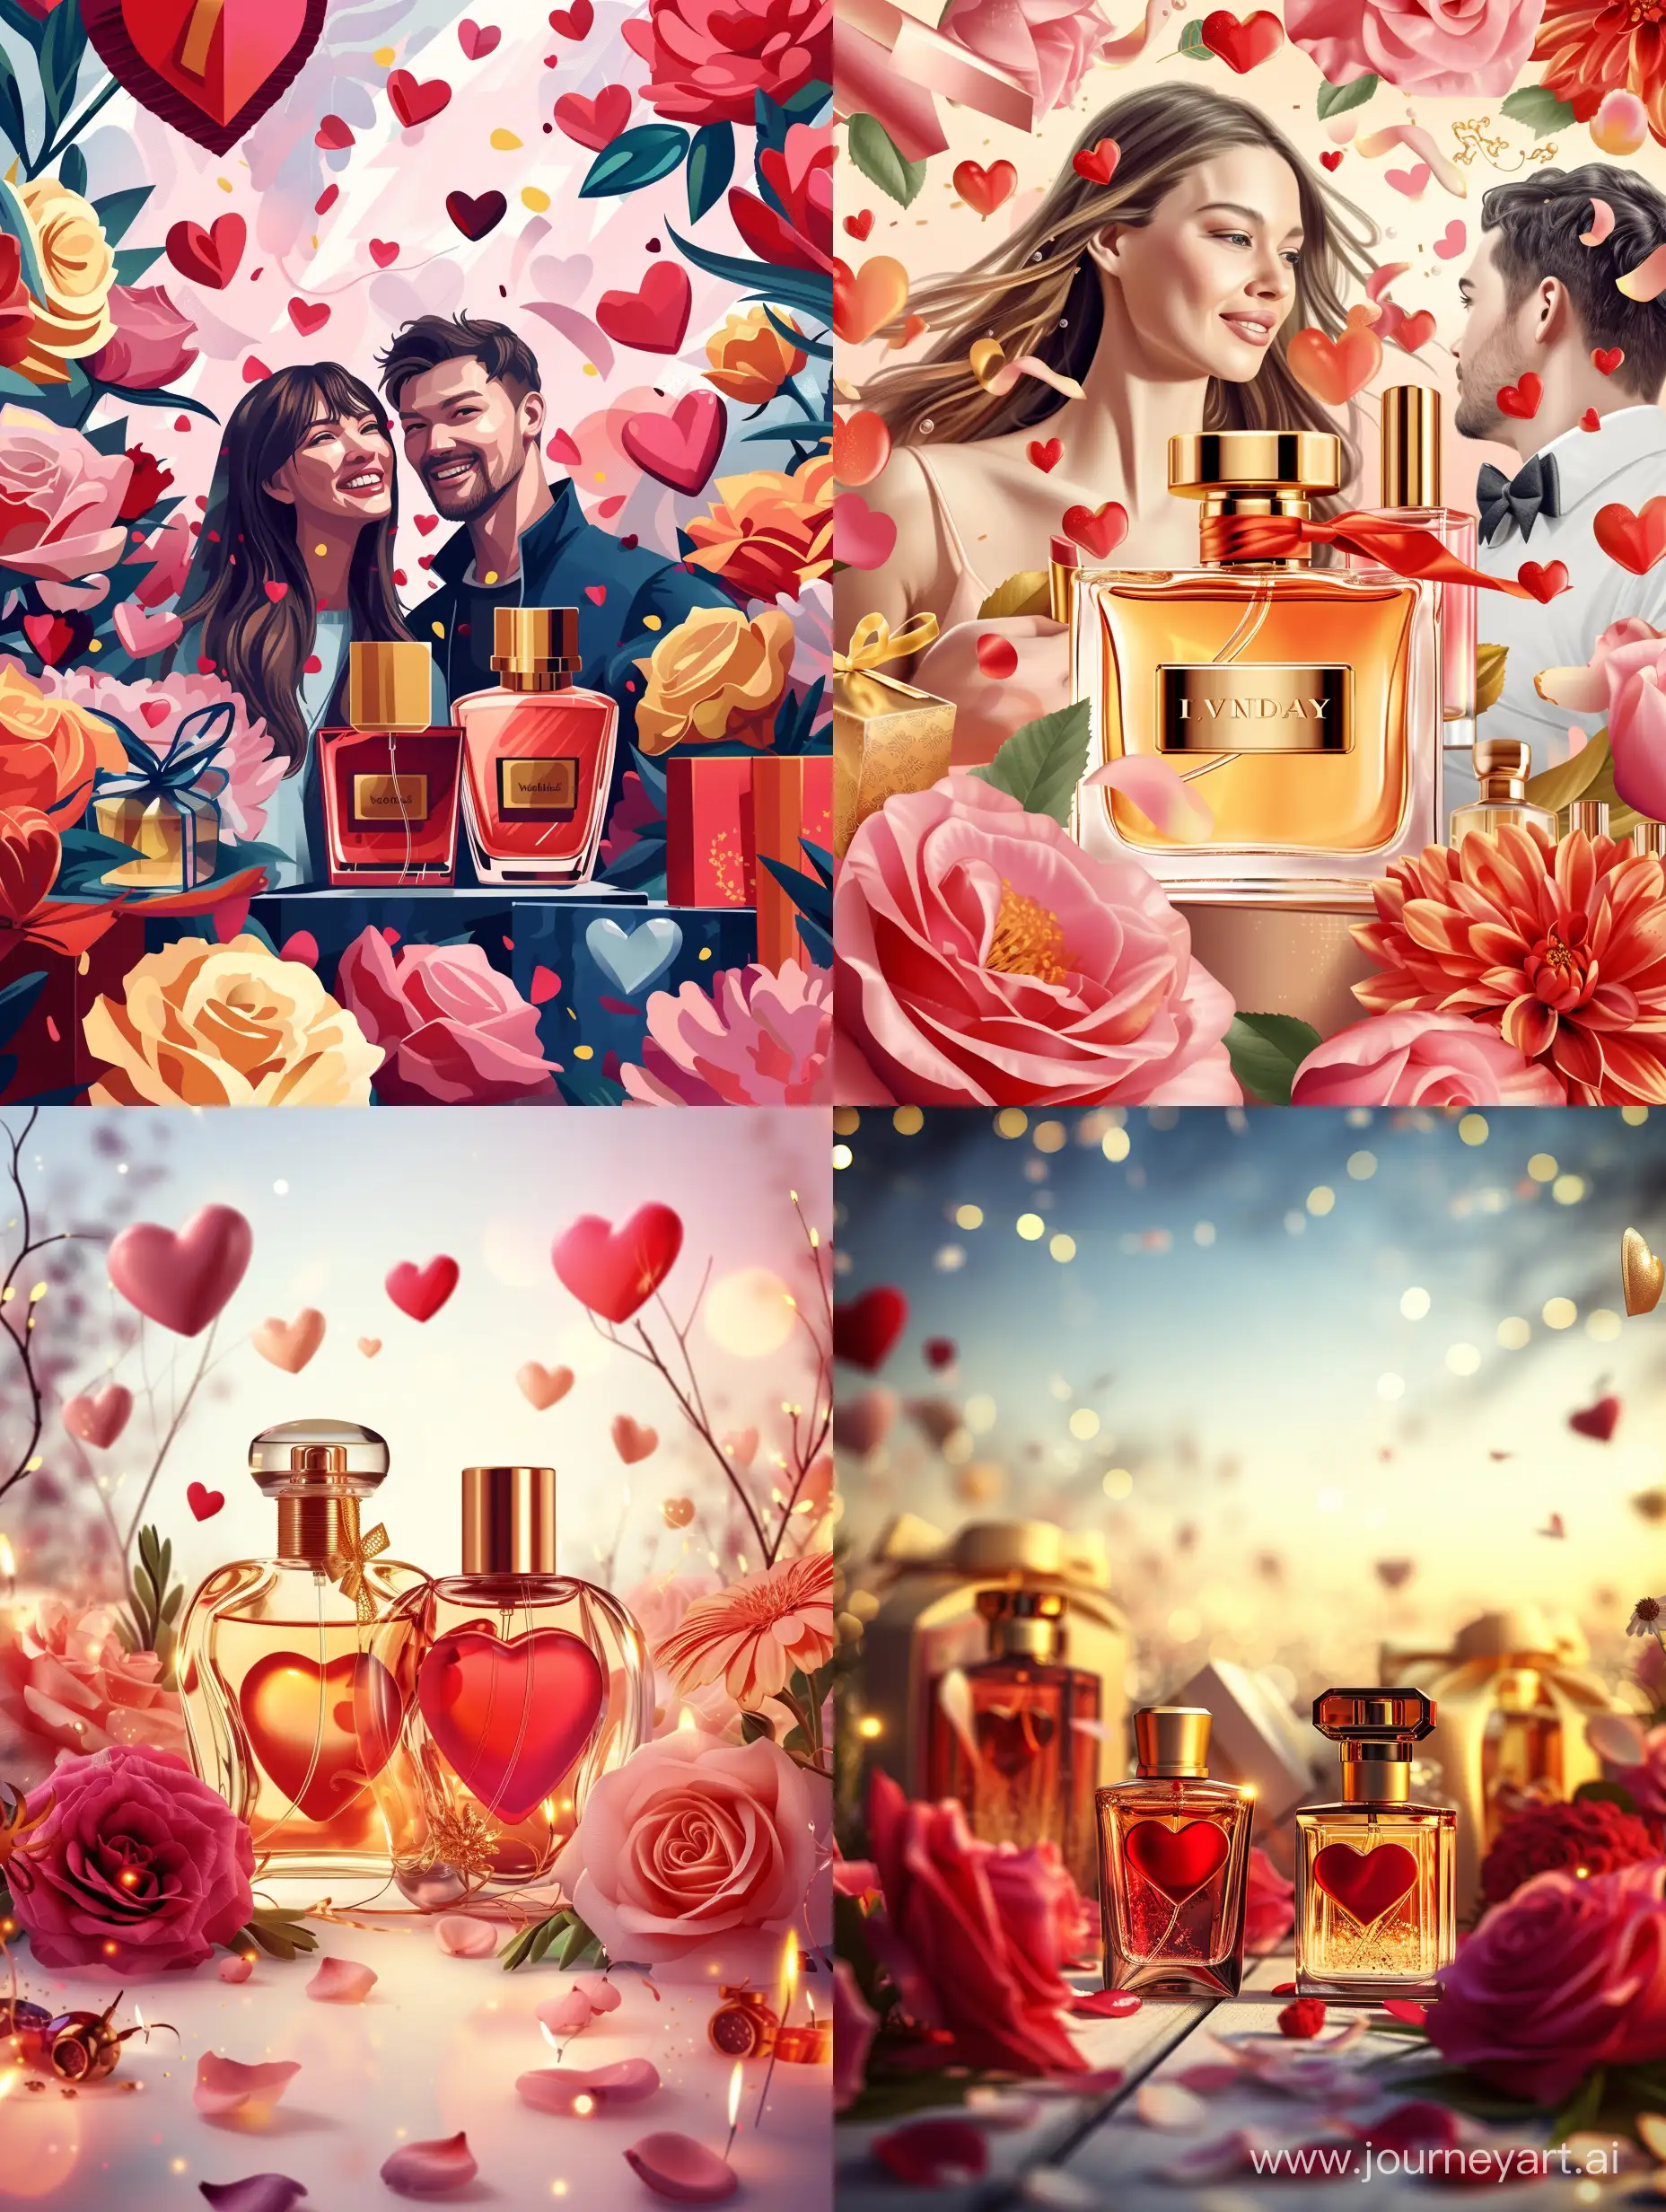 Valentine's Day, flowers, hearts, festive atmosphere, beautiful perfume bottles, gifts, cosmetics, beautiful background, woman and man, realistic, detailed